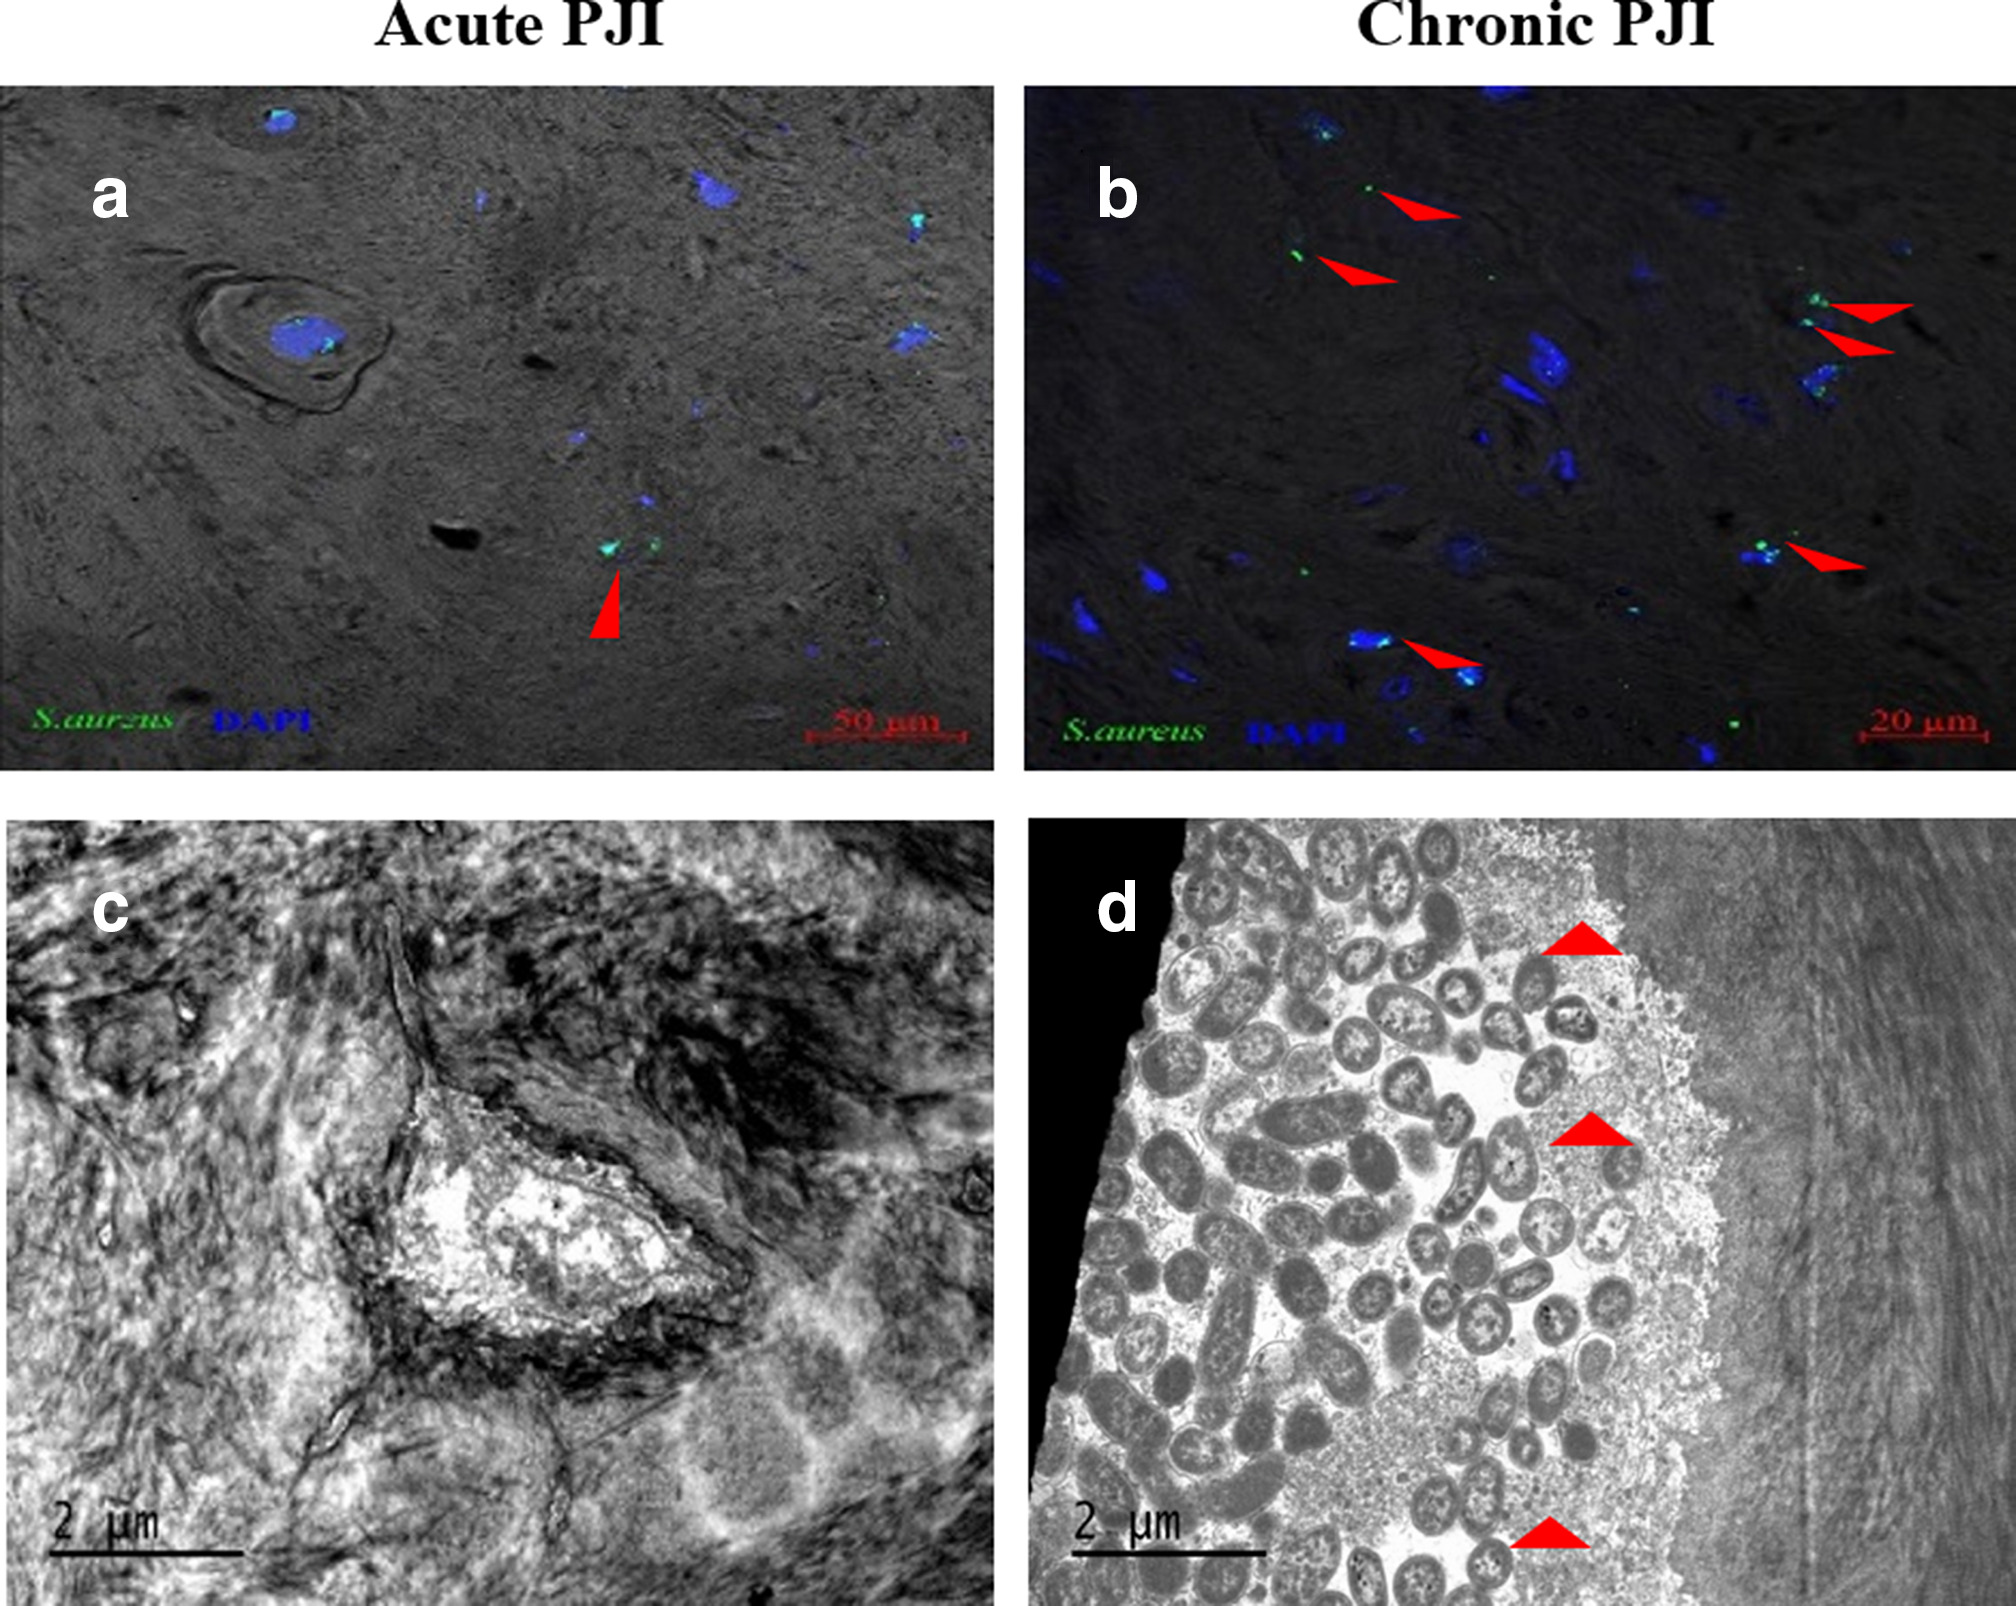 Fig. 2 
            a) to b) Immunofluorescence and c) to d) transmission electron microscopy results of acute and chronic Staphylococcus aureus periprosthetic joint infection (PJI) bone tissues: there was more S. aureus colonization in chronic PJI bone tissues than in acute PJI (indicated by red arrows). DAPI, 4′,6-diamidino-2-phenylindole.
          